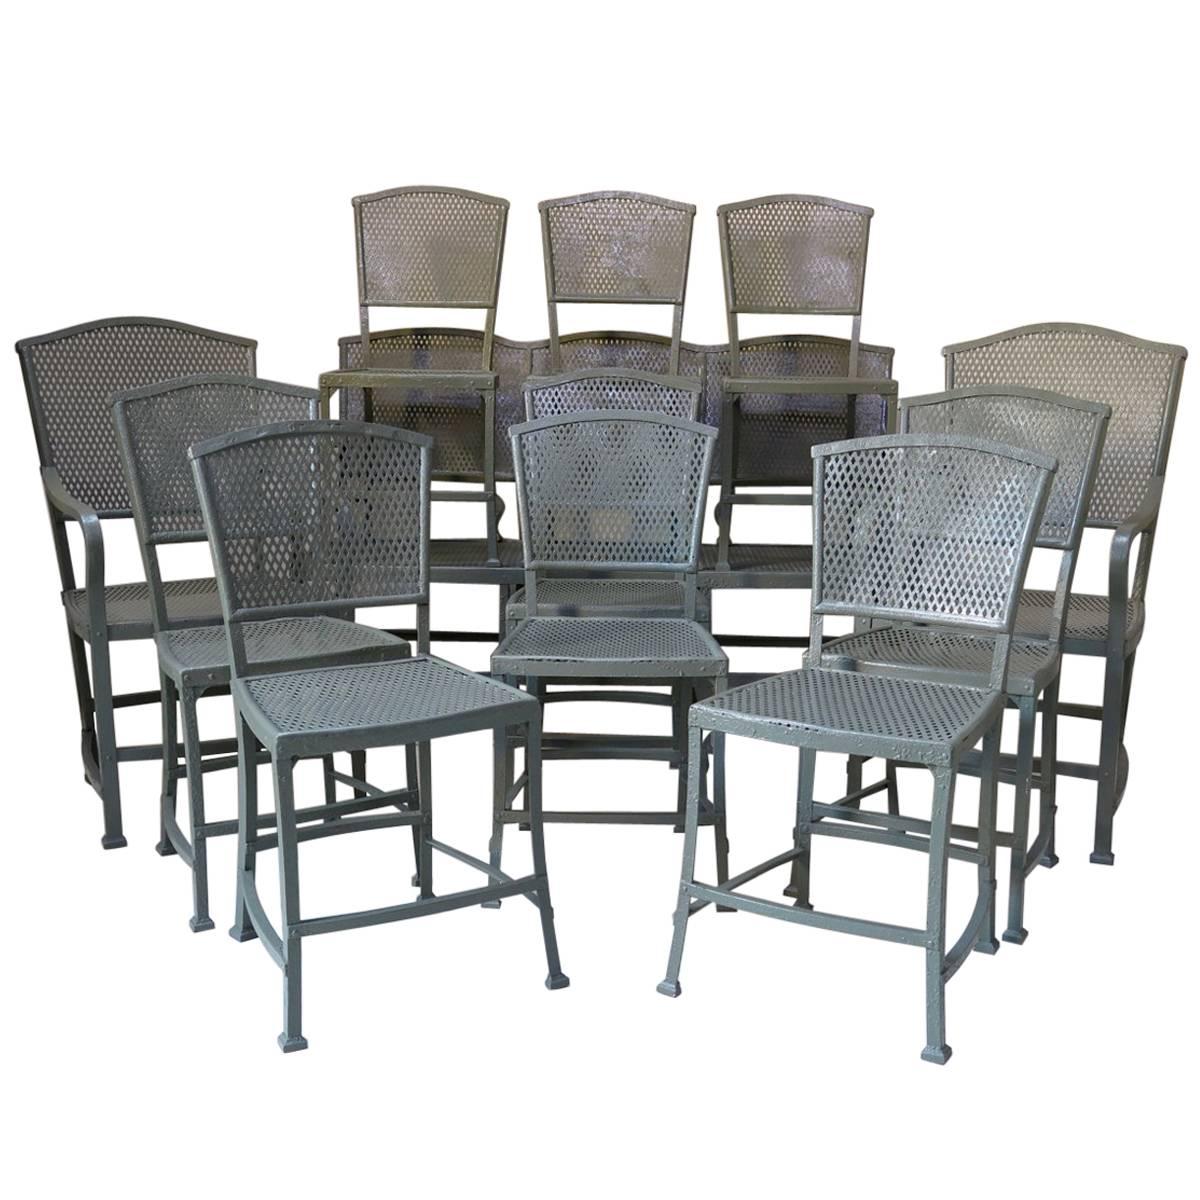 12-Piece "Rothschild" Iron Seating Set from Arras, France, circa 1920s